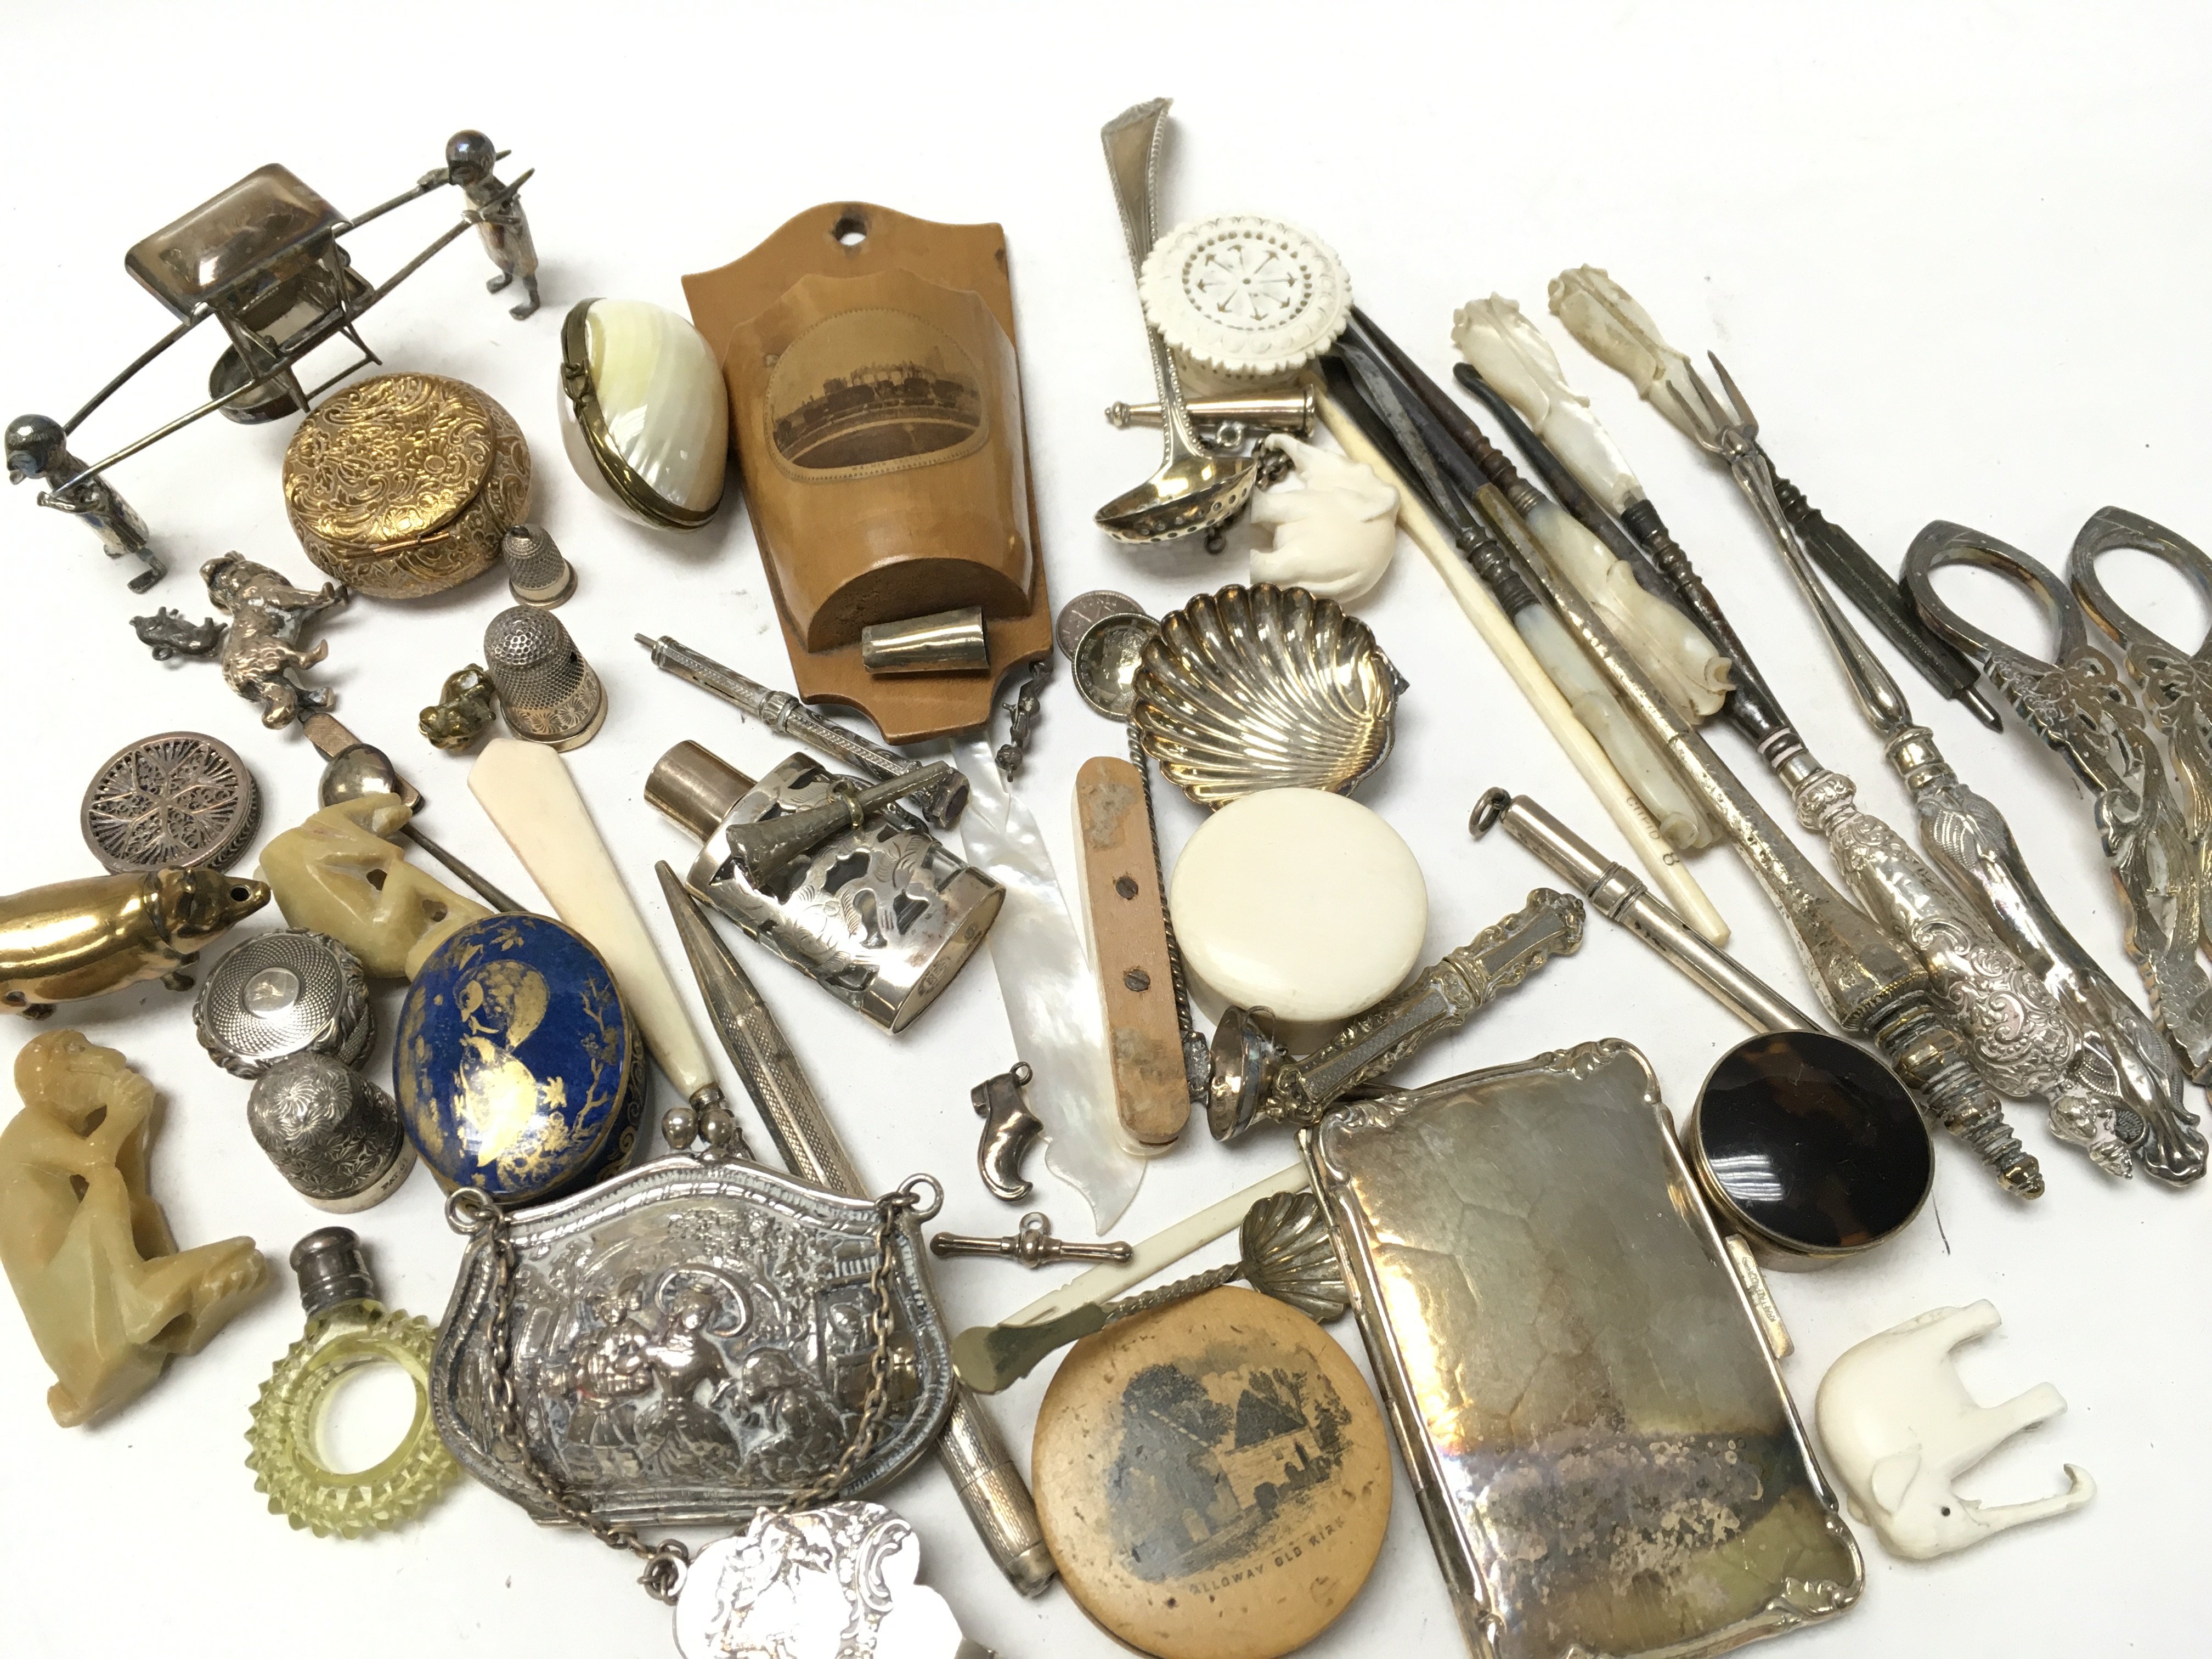 A collection of silver and other oddments including a pair of grape scissors , thimbles, watch keys, - Image 2 of 2